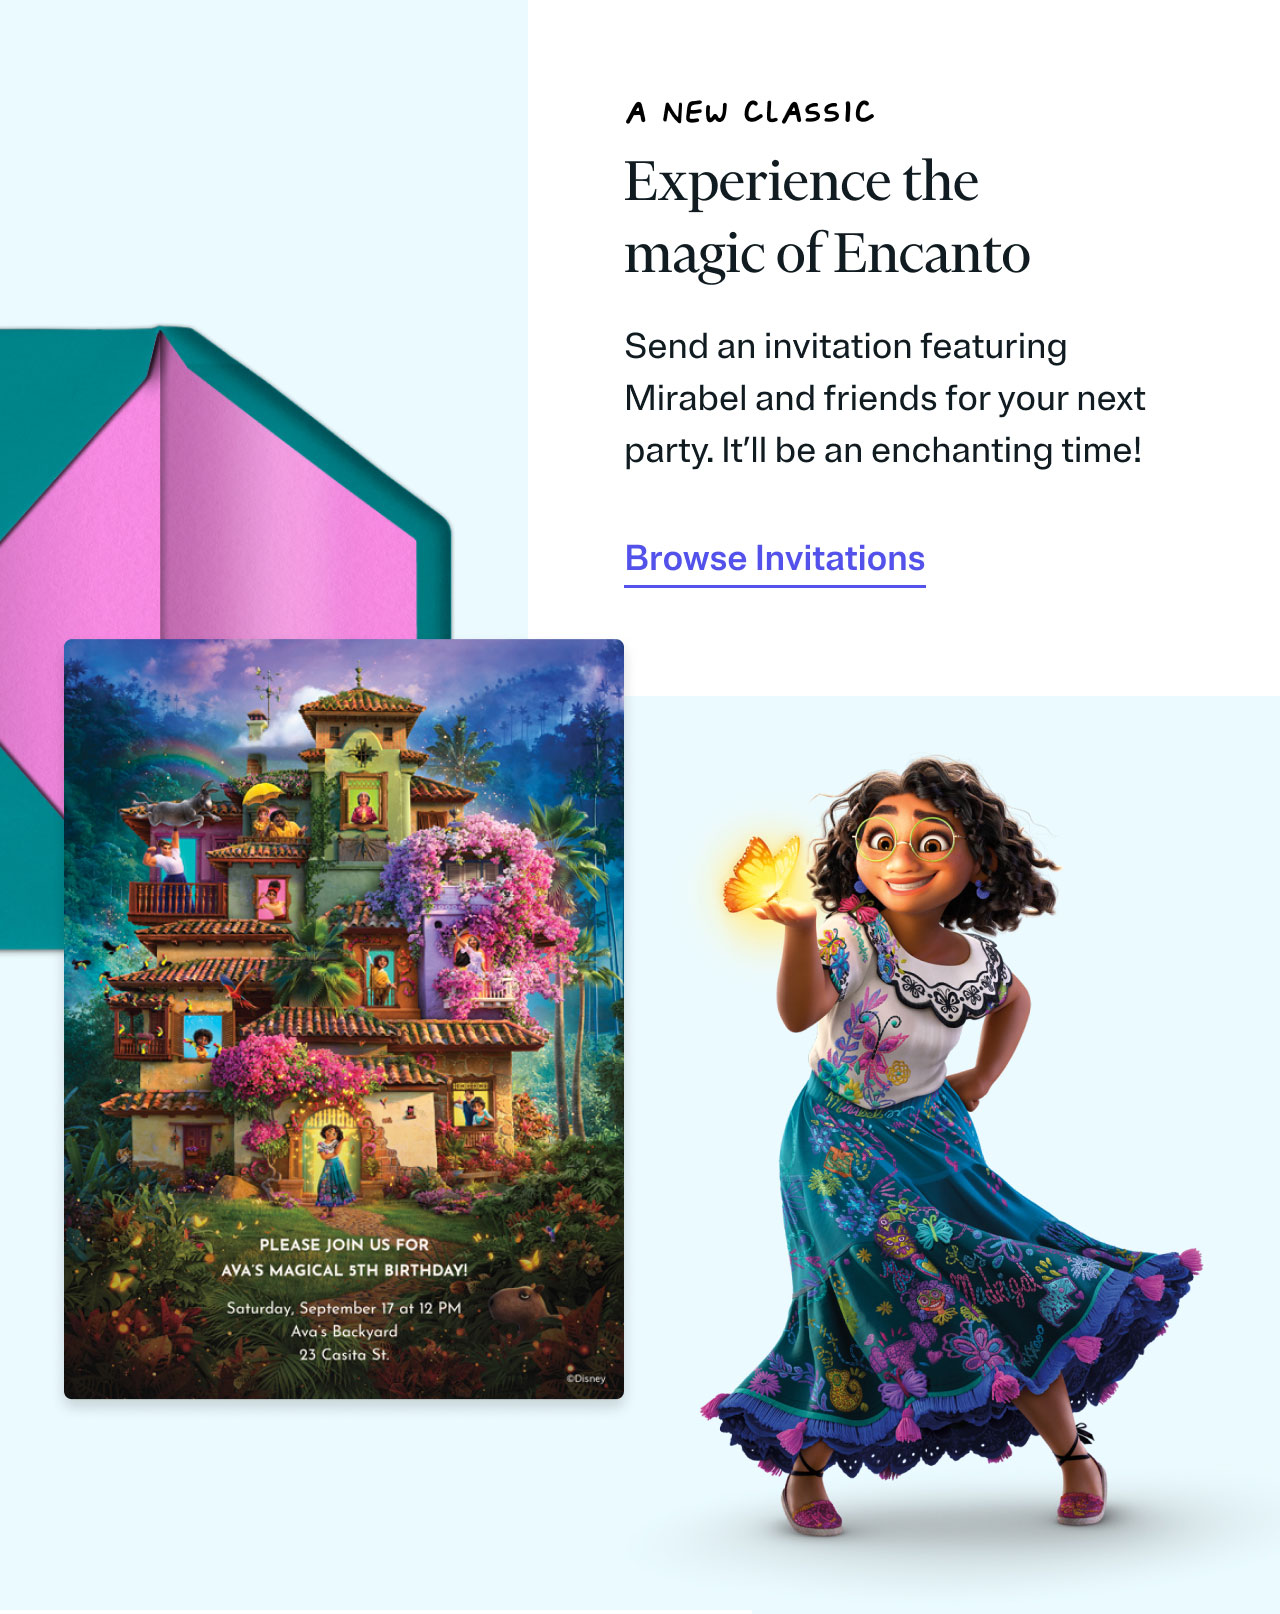 A New Classic | Experience the magic of Encanto | Send an invitation featuring Mirabel and friends for your next party. It’ll be an enchanting time!